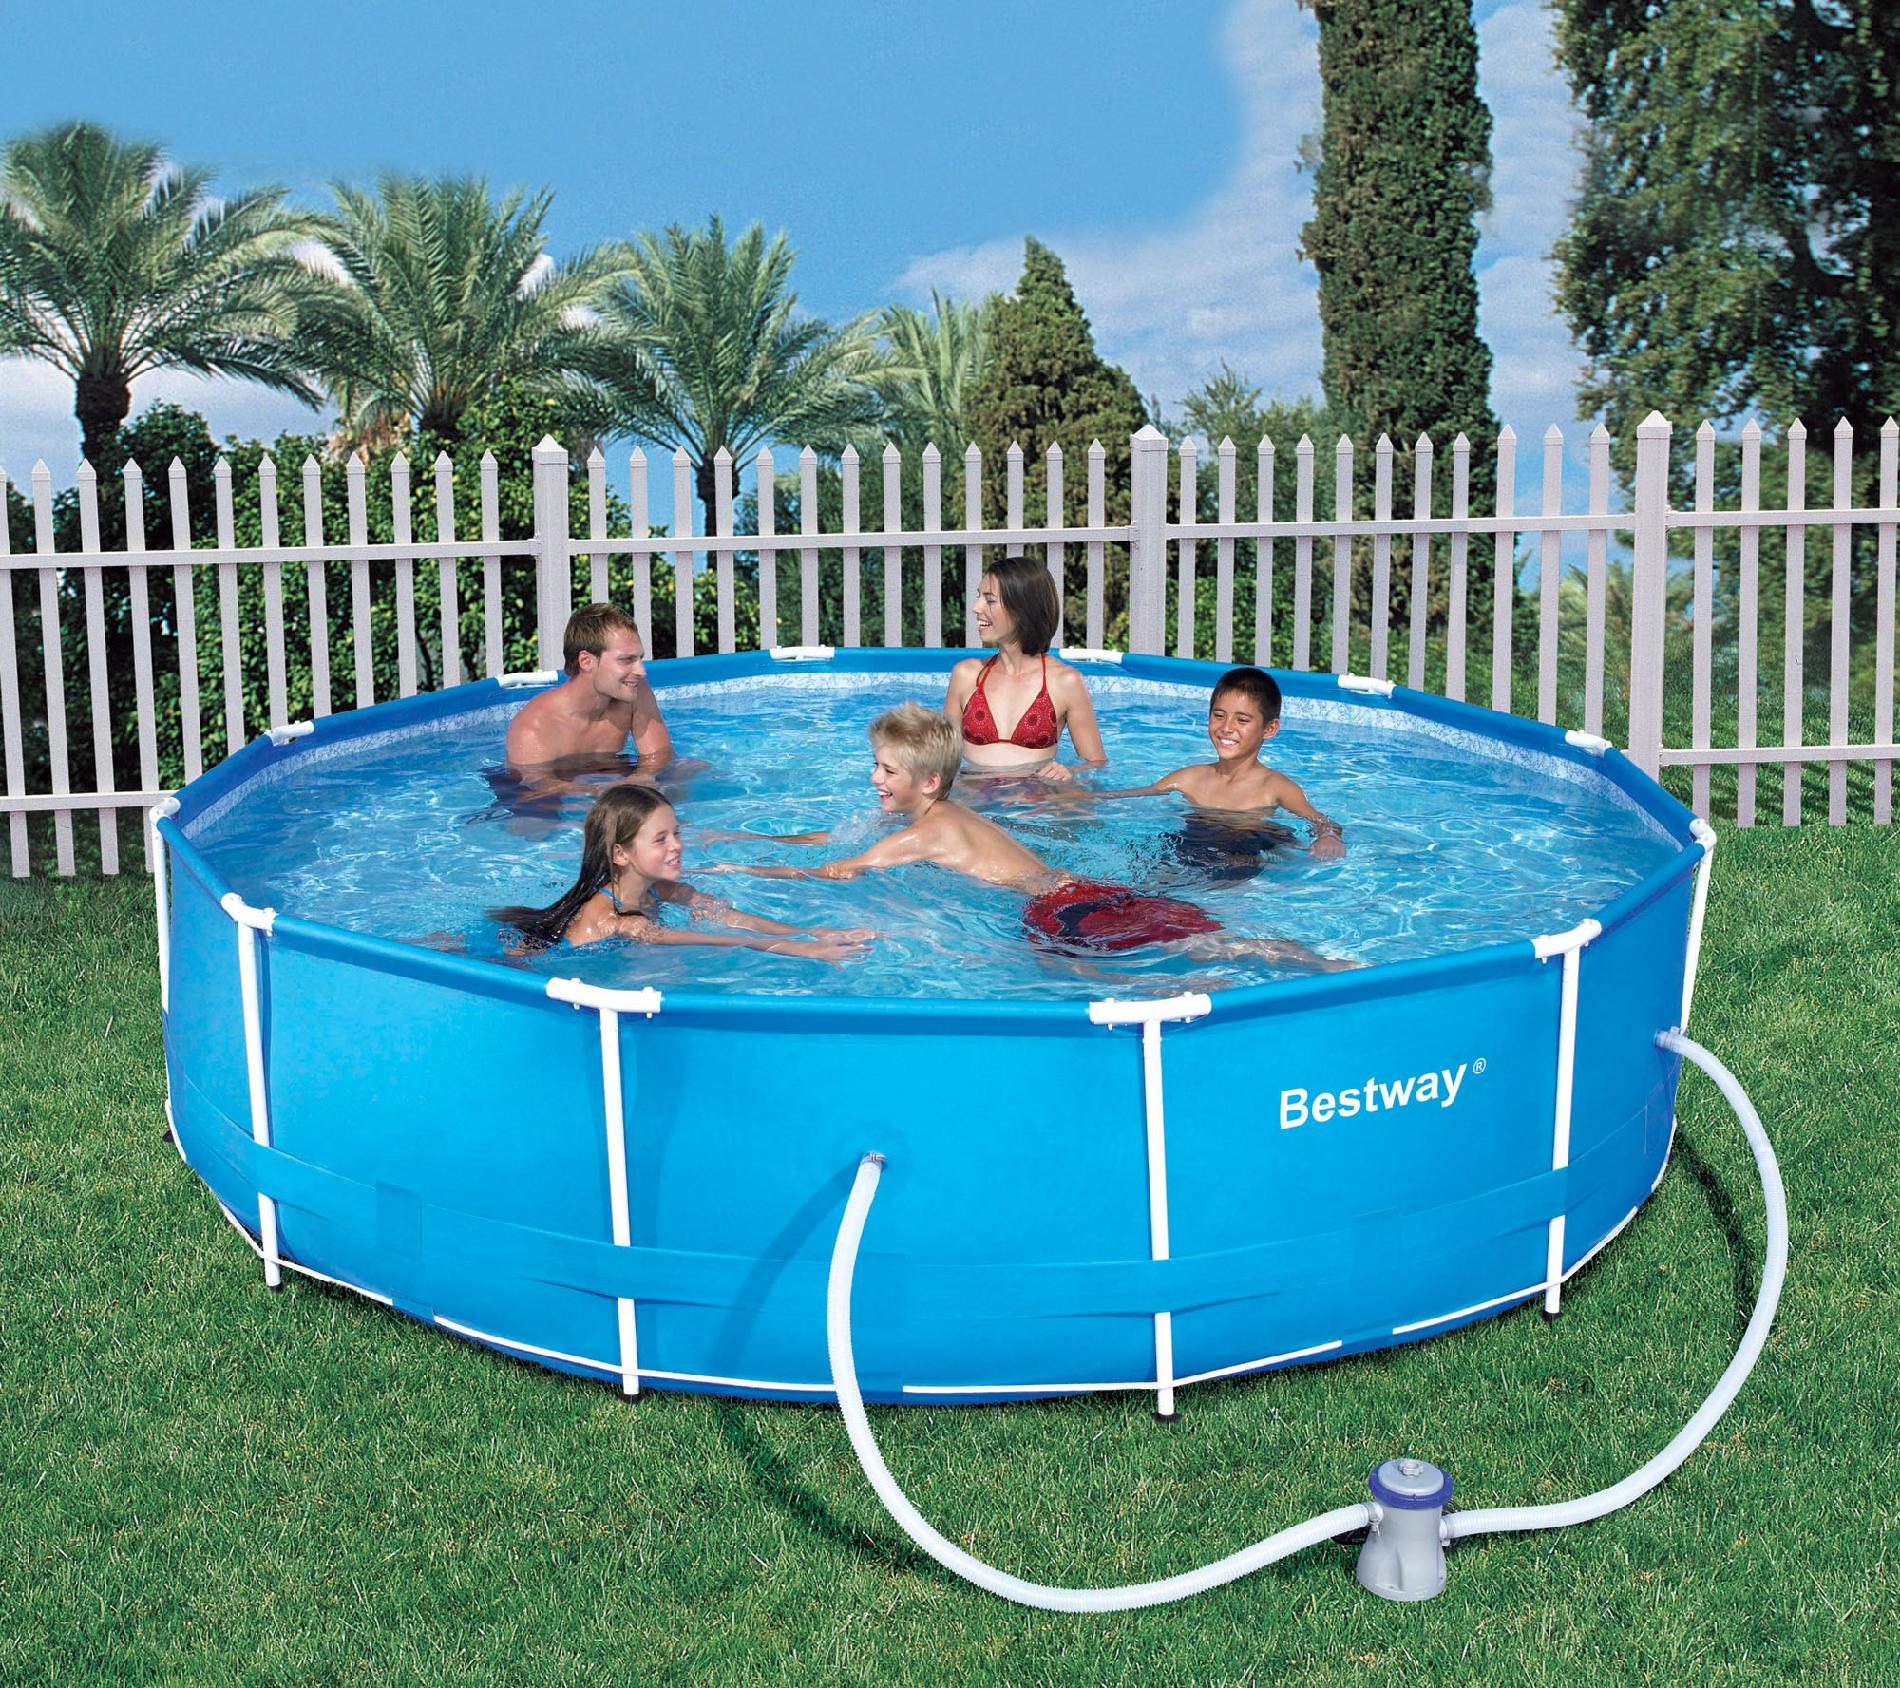 Bestway 12′ Round Steel Frame Family Pool Only $119.99! (Layaway Available)